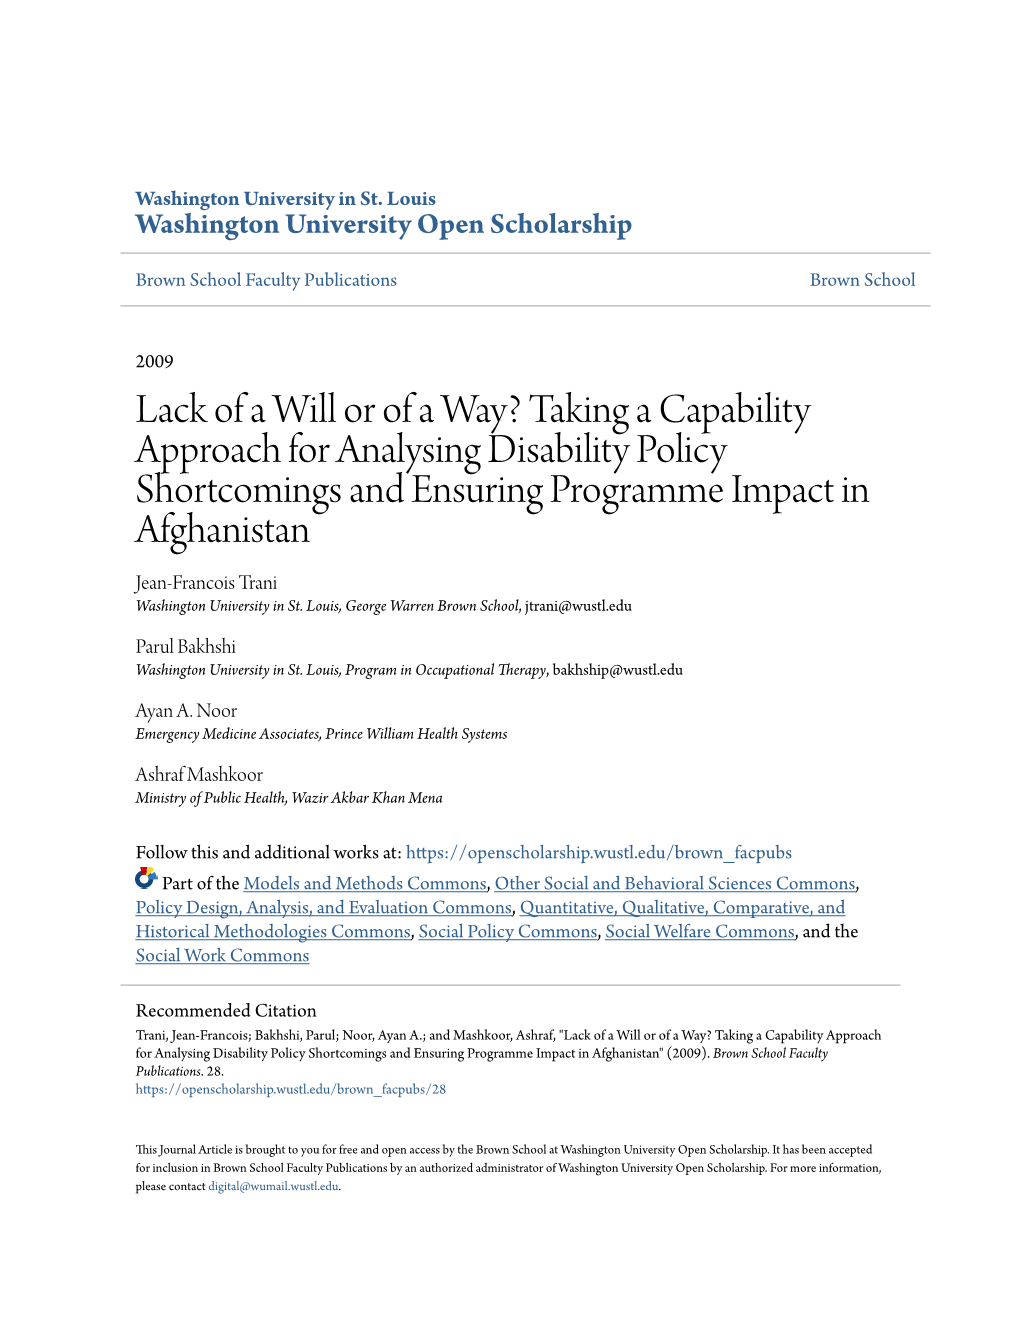 Lack of a Will Or of a Way? Taking a Capability Approach for Analysing